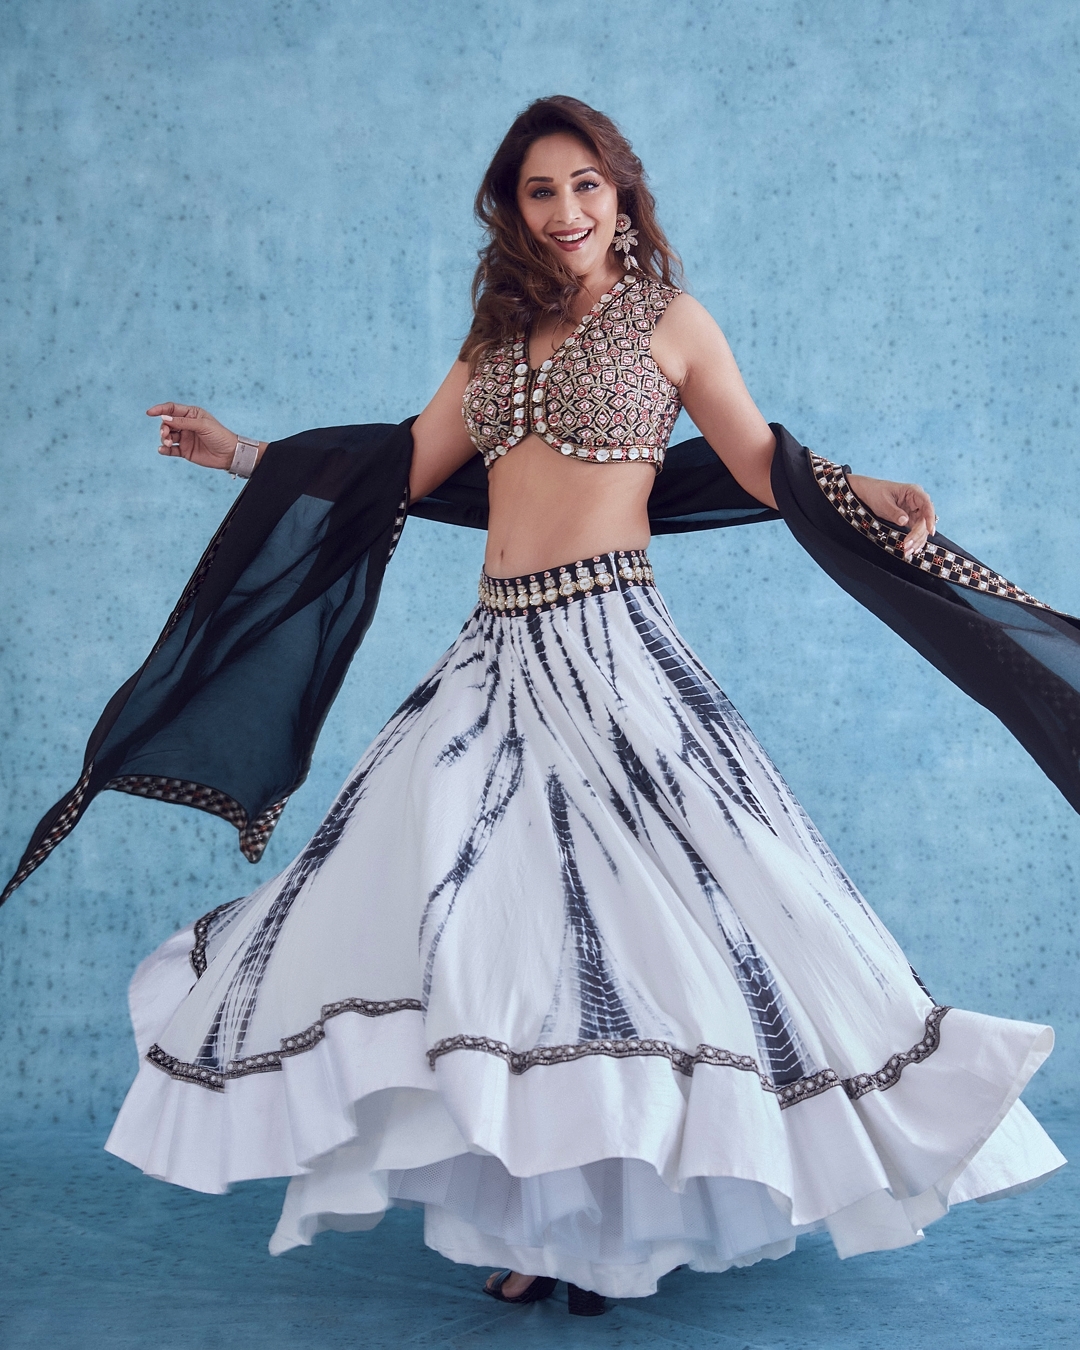  Madhuri Dixit Nene is aging like fine wine. In a latest set of photos, the 'dhak dhak' girl is seen embracing the tie-dye trend in a lehenga and embellished choli. (Image: Instagram)